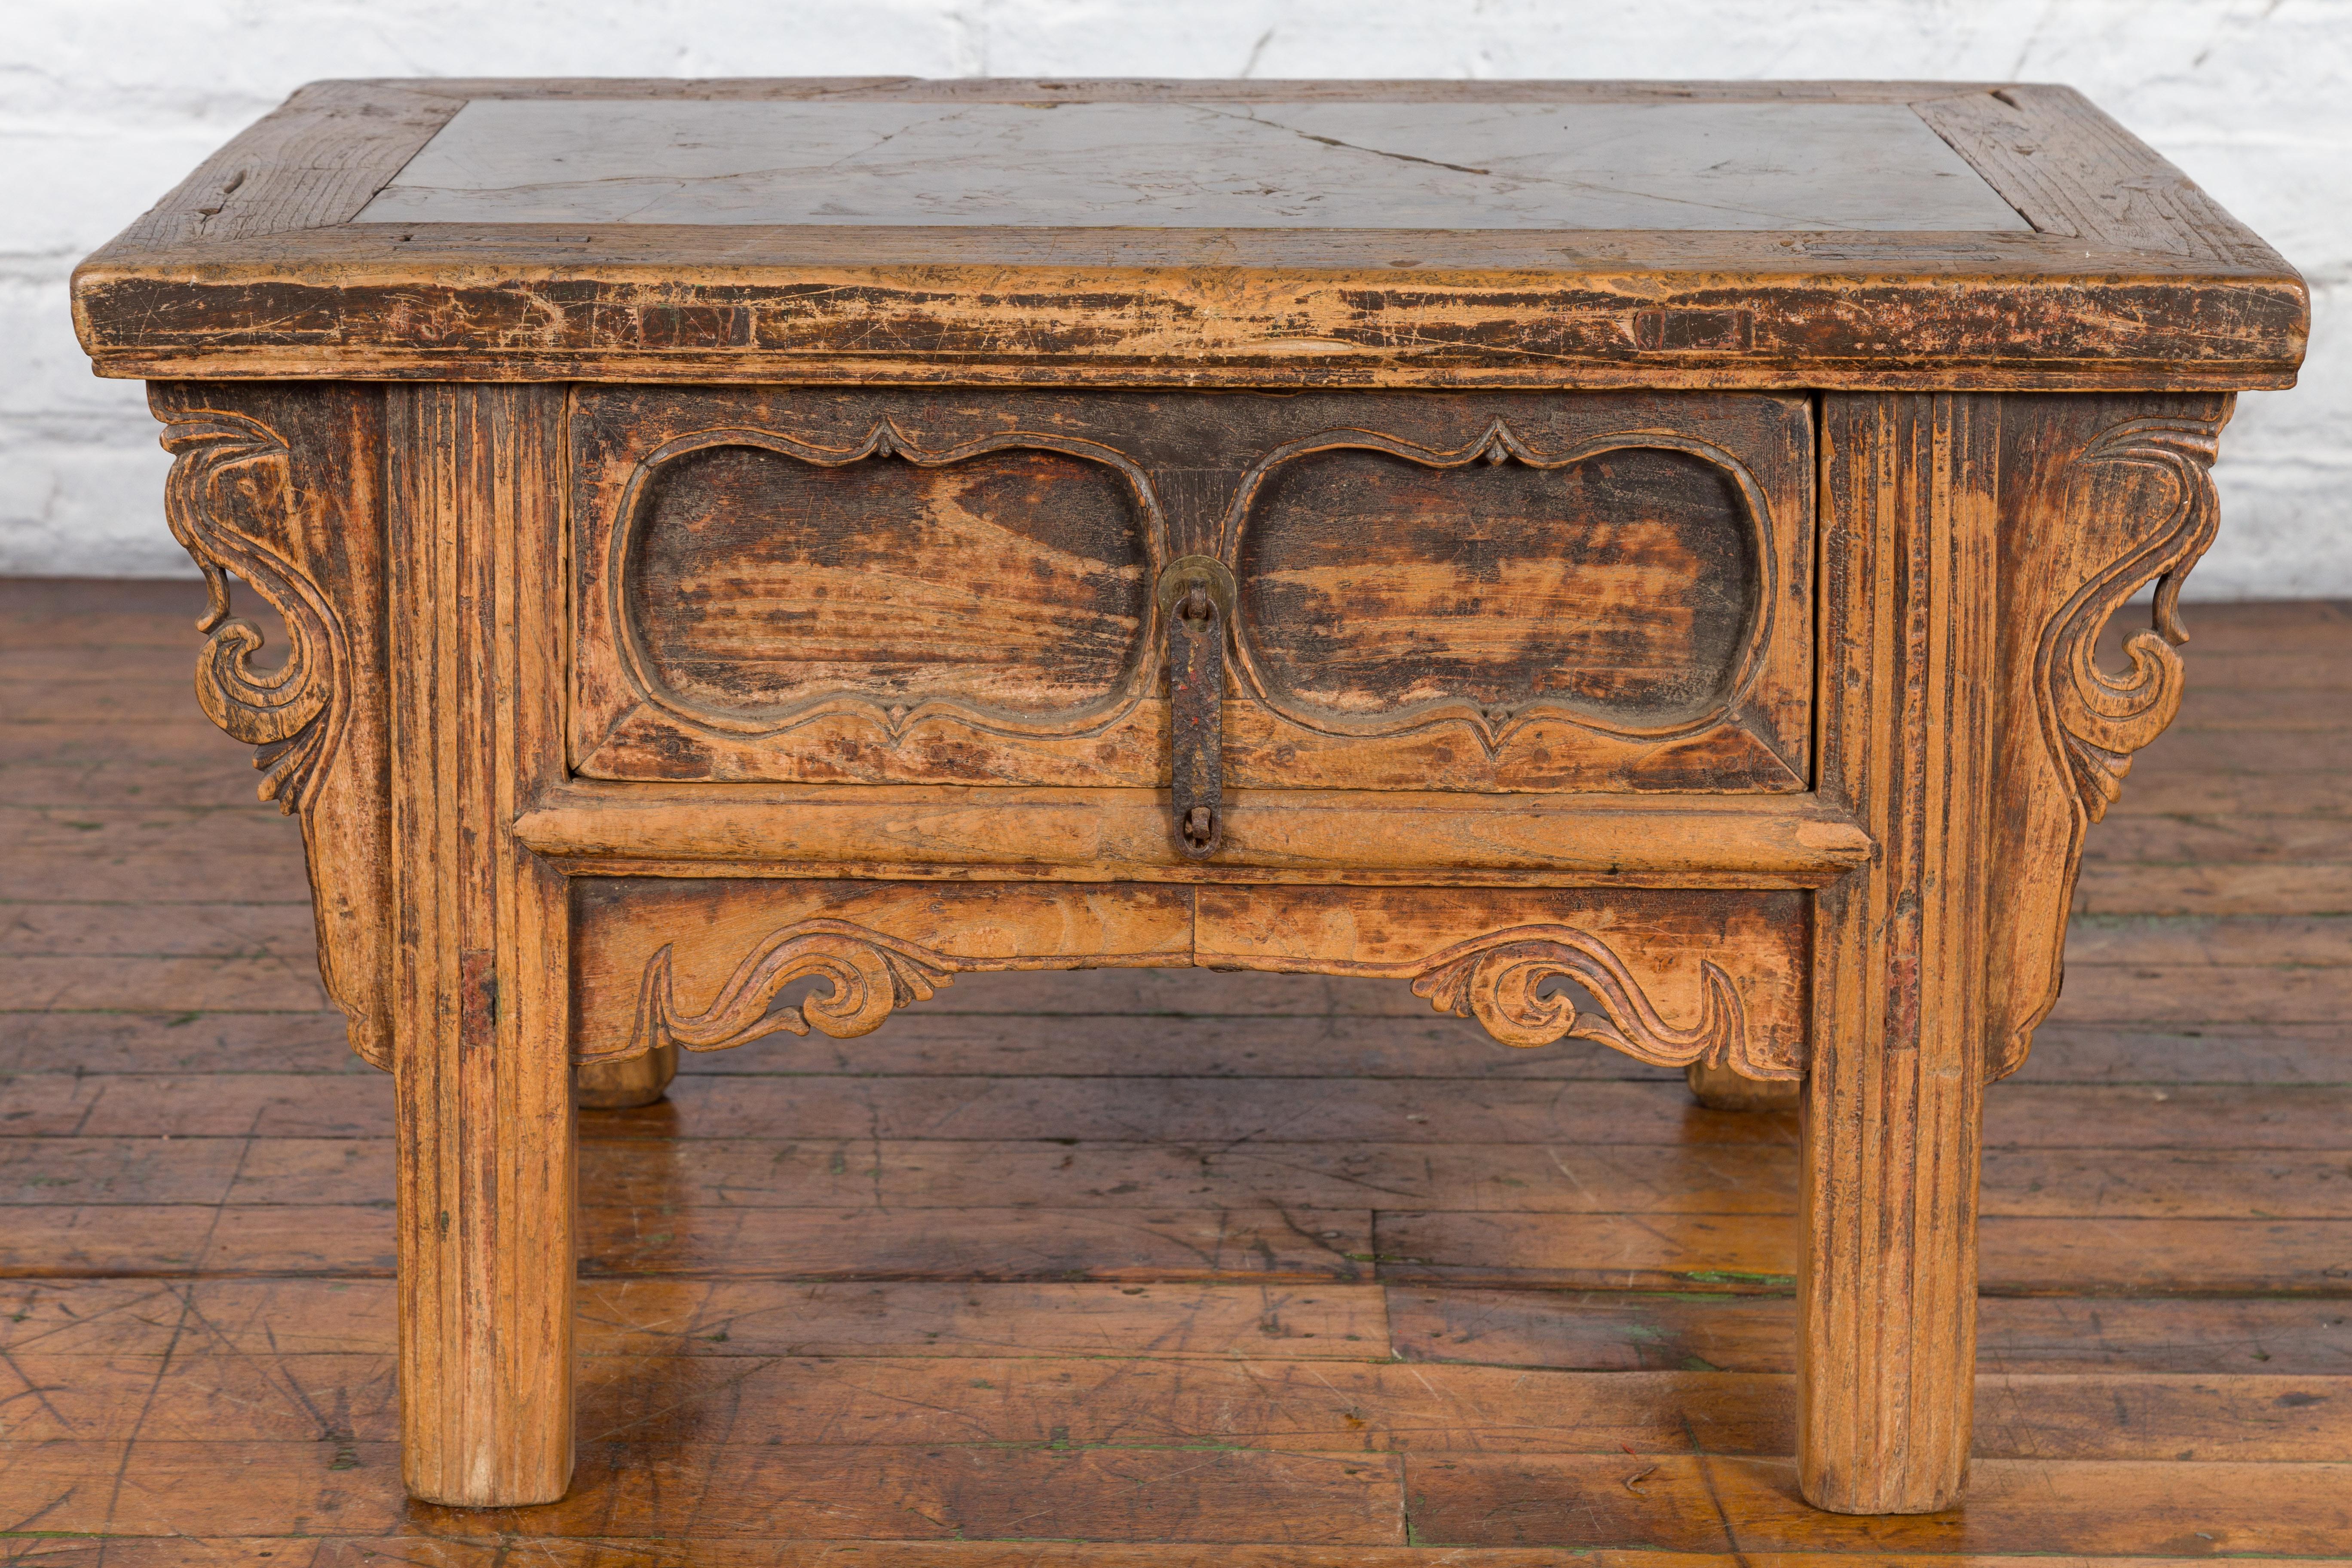 Chinese Qing Dynasty 19th Century Carved Low Elm Table with Ming Stone Inset For Sale 3